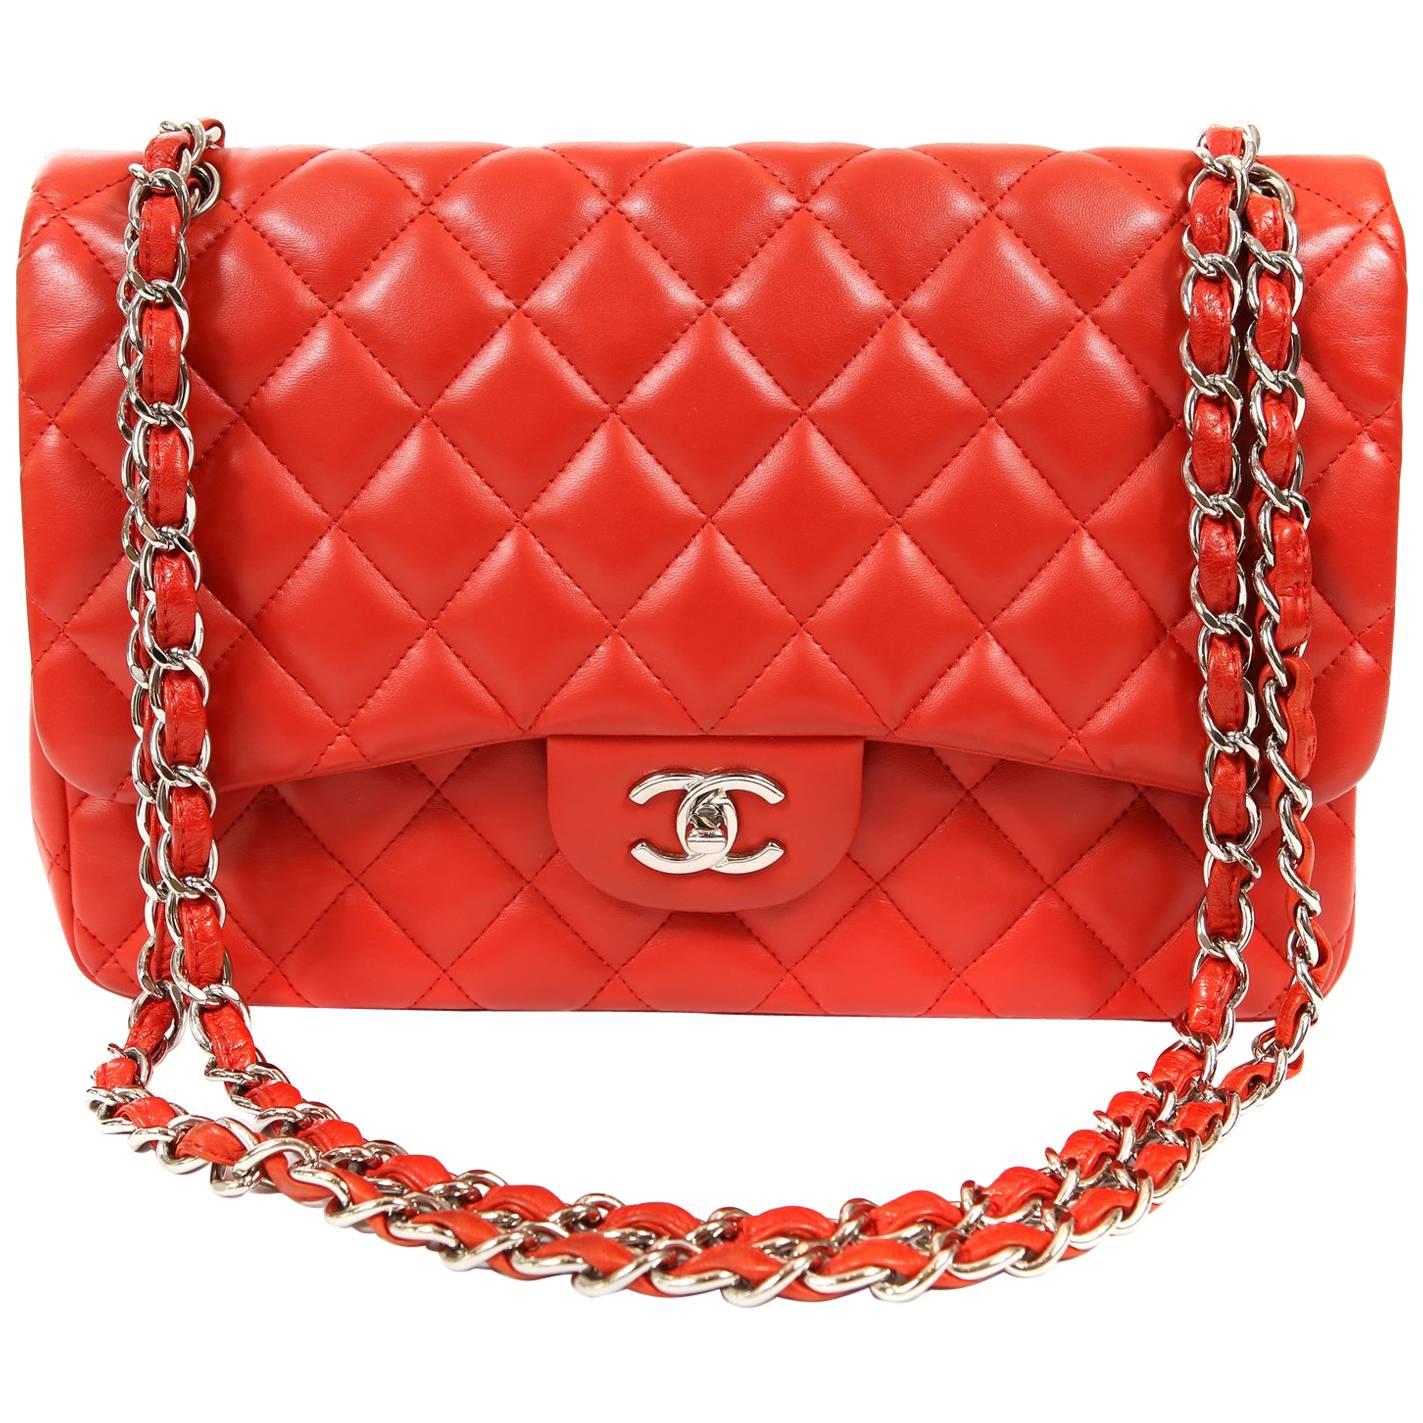 Chanel Red Lambskin Jumbo Classic Double Flap Bag with Silver HW